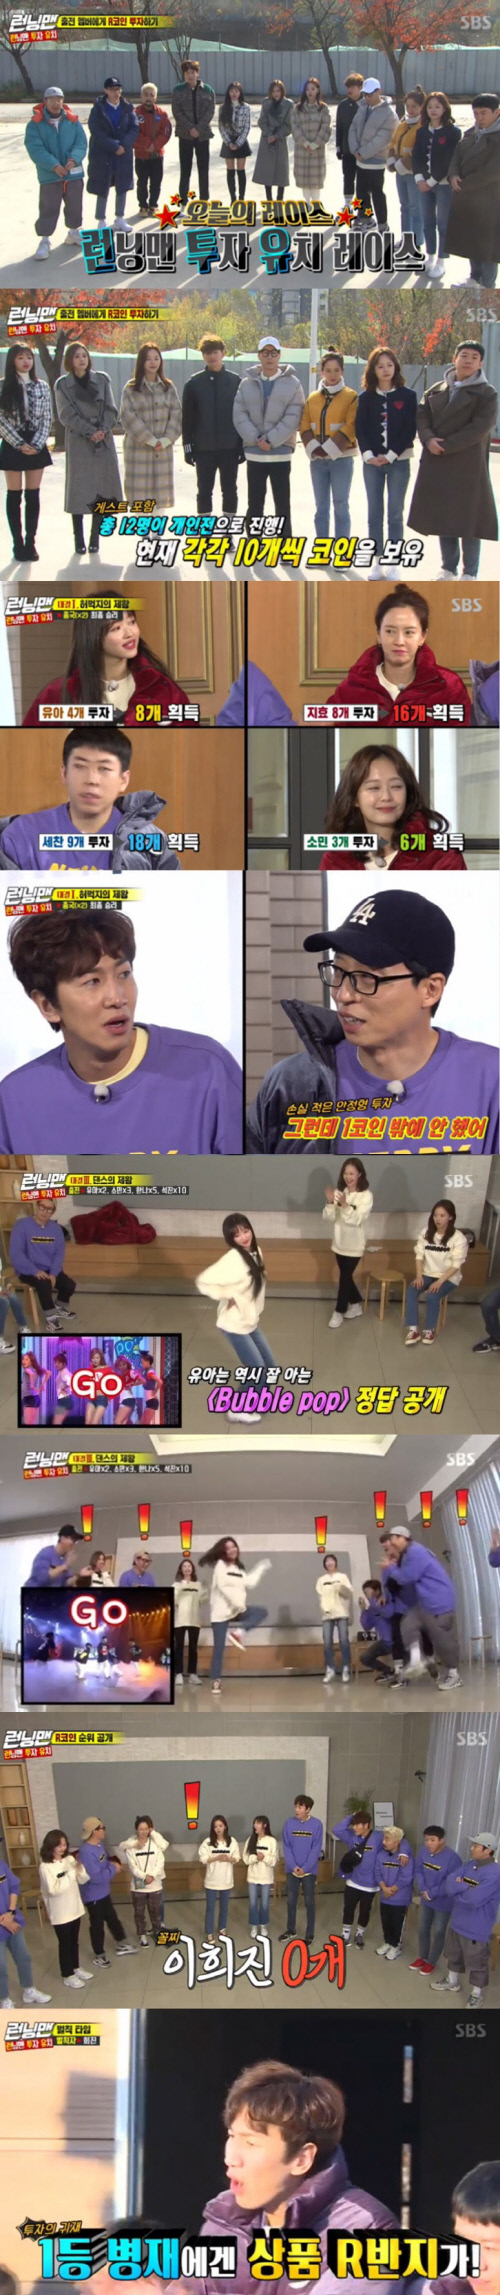 According to Nielsen Korea, a TV viewer rating research institute, Running Man, which was broadcast on the 1st, ranked first in entertainment in the same time zone with 3.7% of 2049 target TV viewer ratings (based on the second part of the Seoul metropolitan area).The average TV viewer ratings were 5% for the first part and 7.1% for the second part, while the highest TV viewer ratings per minute soared to 7.9%.The broadcast was held as Running Man Investment Attraction Race, with actors Kang Han-na, Lee Hee-Jin, YooAA of Oh My Girl and broadcaster Yoo Byung-jae as guests.Members can invest RCOIN in each round to call their assets, and the person with the least RCOIN will be punished.The first confrontation was the Lord of the thighs as a pain-bearing confrontation.With Kim Jong-kook winning as everyone expected, Lee Kwang-soo was hit in the thigh by Kim Jong-kook and pulled out painfully to laugh.Song Ji-hyo, Jeon So-min, Yang Se-chan and YooAA, who invested in Kim Jong-kook, were called RCOIN.In the second showdown quiz, The King of Quiz, Haha, Lee Kwang-soo, and Yoo Byung-jae, who invested in him as Brain YooA Jae-Suk won the championship, earned twice as much COIN.In the third showdown, The King of Dance, the Dance Shin Dance King YooAAs big success attracted attention and won first place, and investors YooA Jae-Suk, Kim Jong-kook and Yoo Byung-jae also succeeded in being called COIN.In particular, Yoo Byung-jae won the final prize with a lot of COIN in the final match, and Lee Hee-Jin won the Water bomb penalty with 0 COIN.The scene was the best TV viewer rating per minute at 7.9%.Photos  SBS